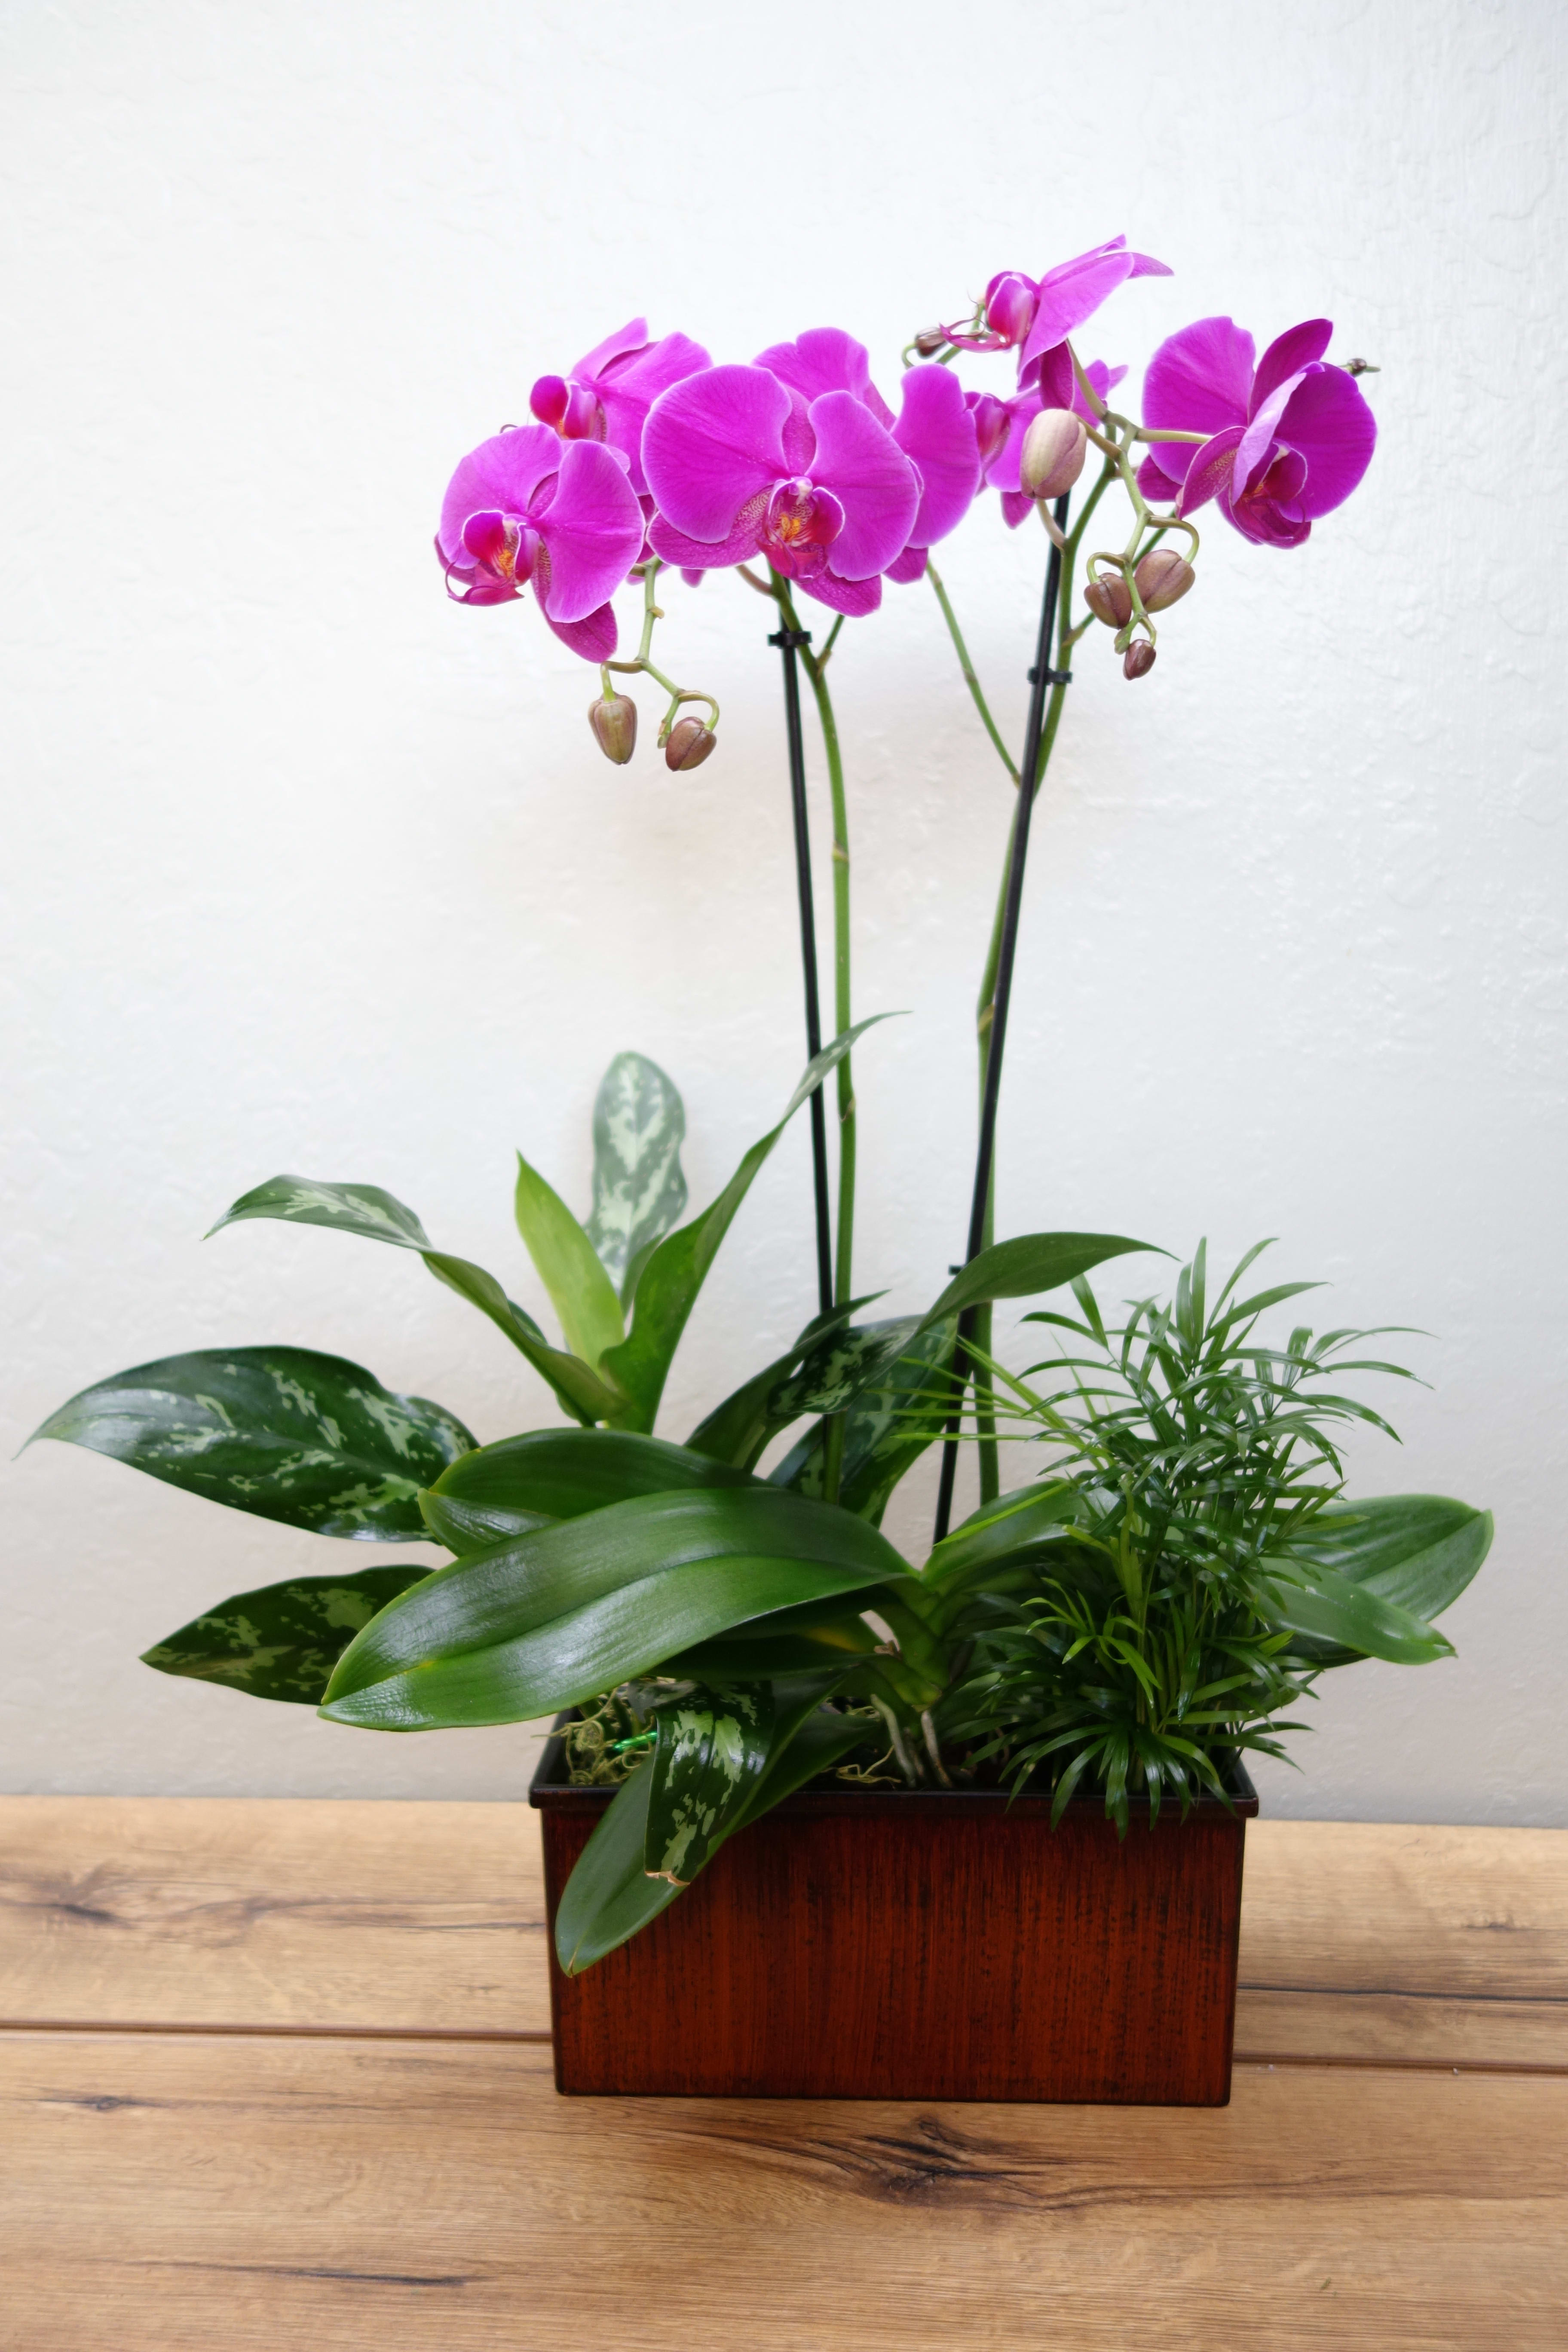 Joyful Purple Phalaenopsis Orchid - A double spike purple phalaenopsis orchid with lush green plants in a wooden rectangular planter. Color tone may vary depending on store availability.